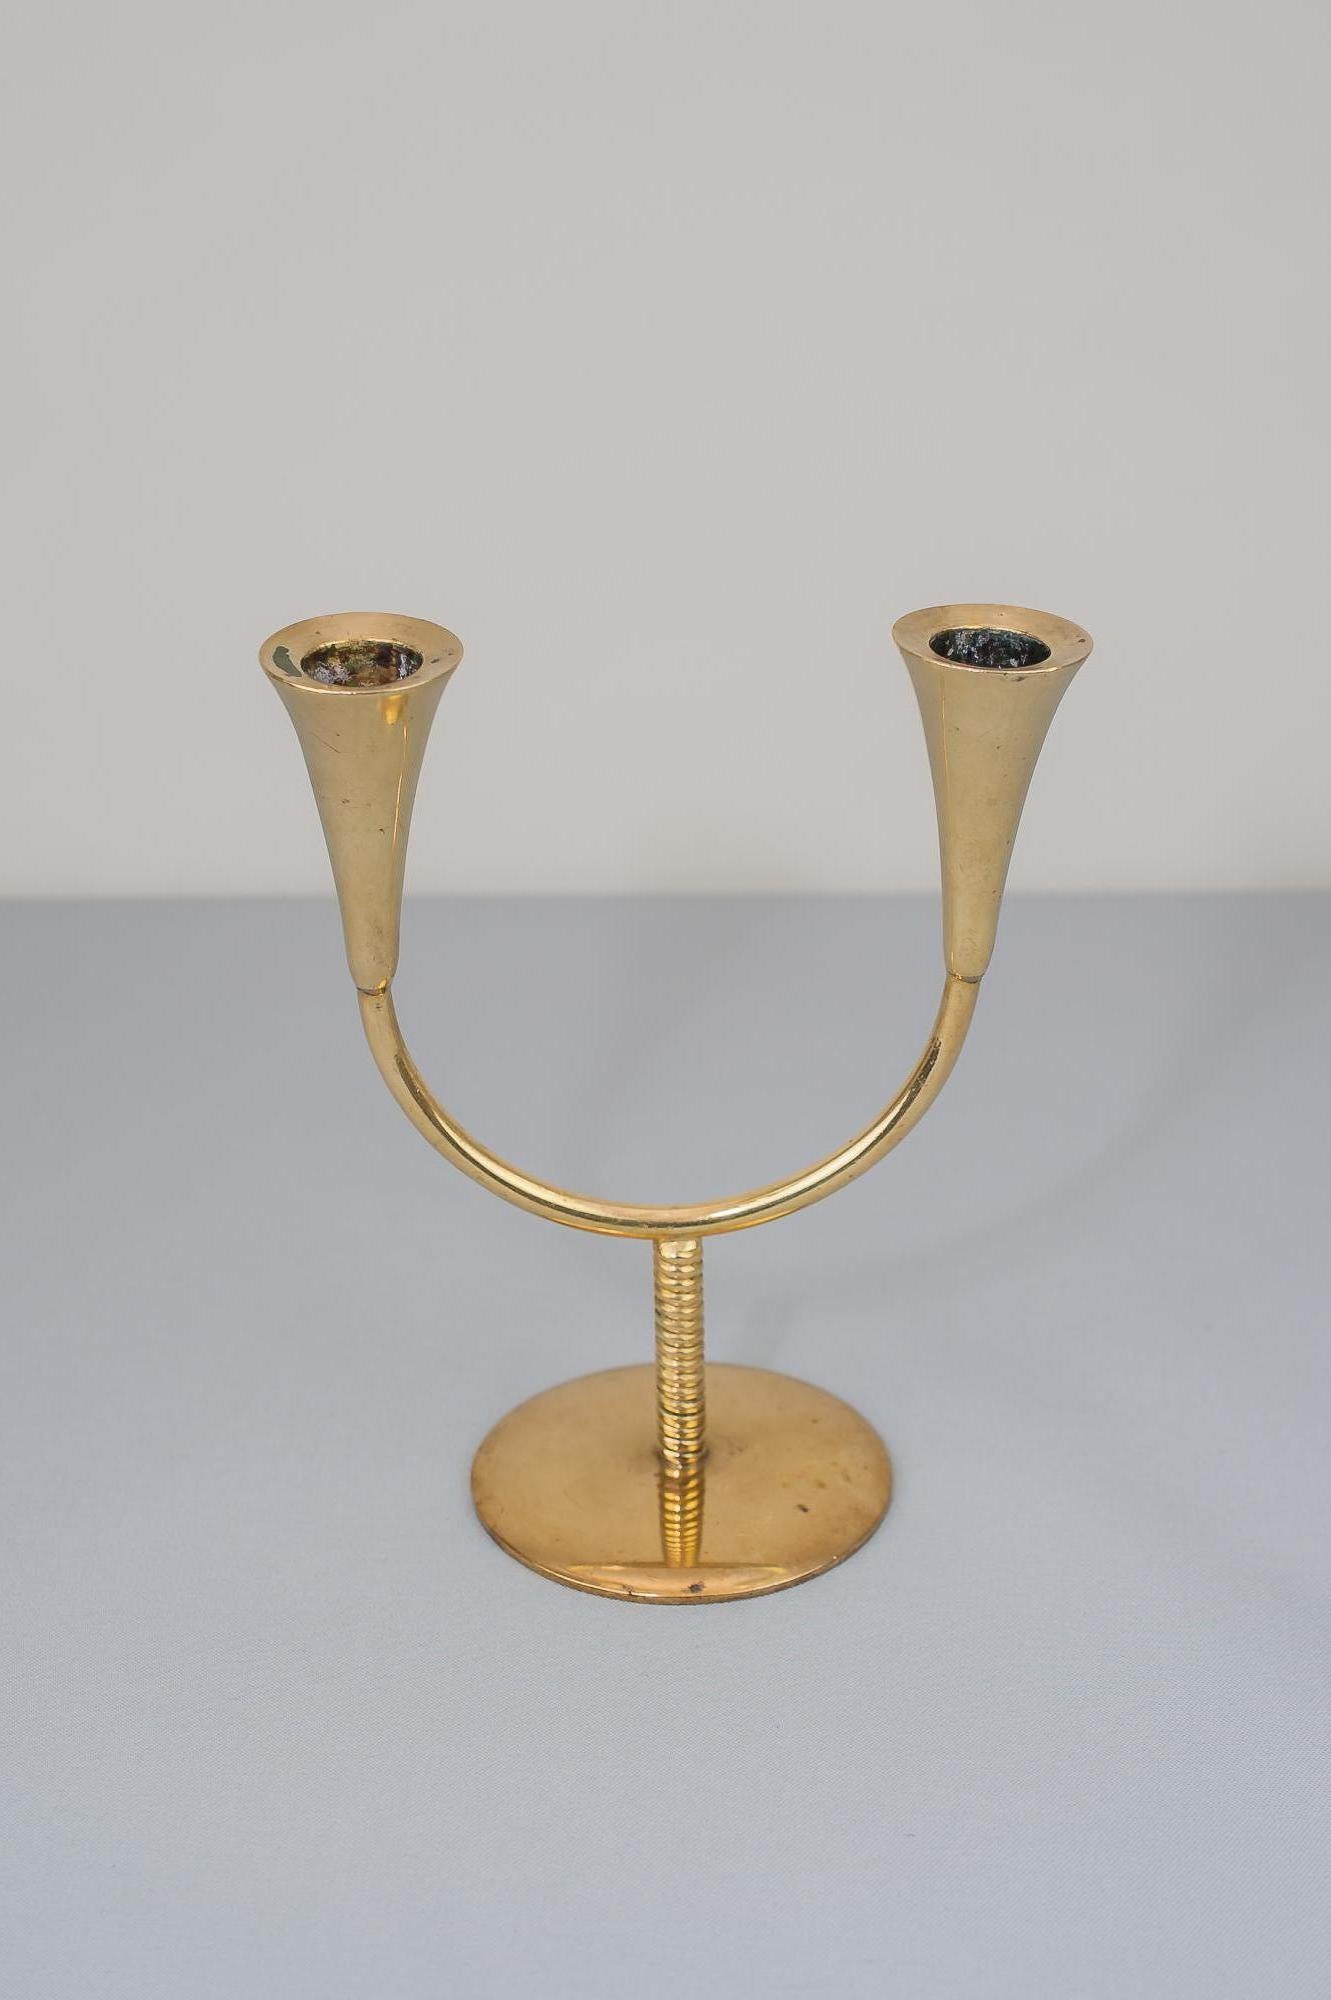 Candle holder by richard rohac ( signed )
Original condition